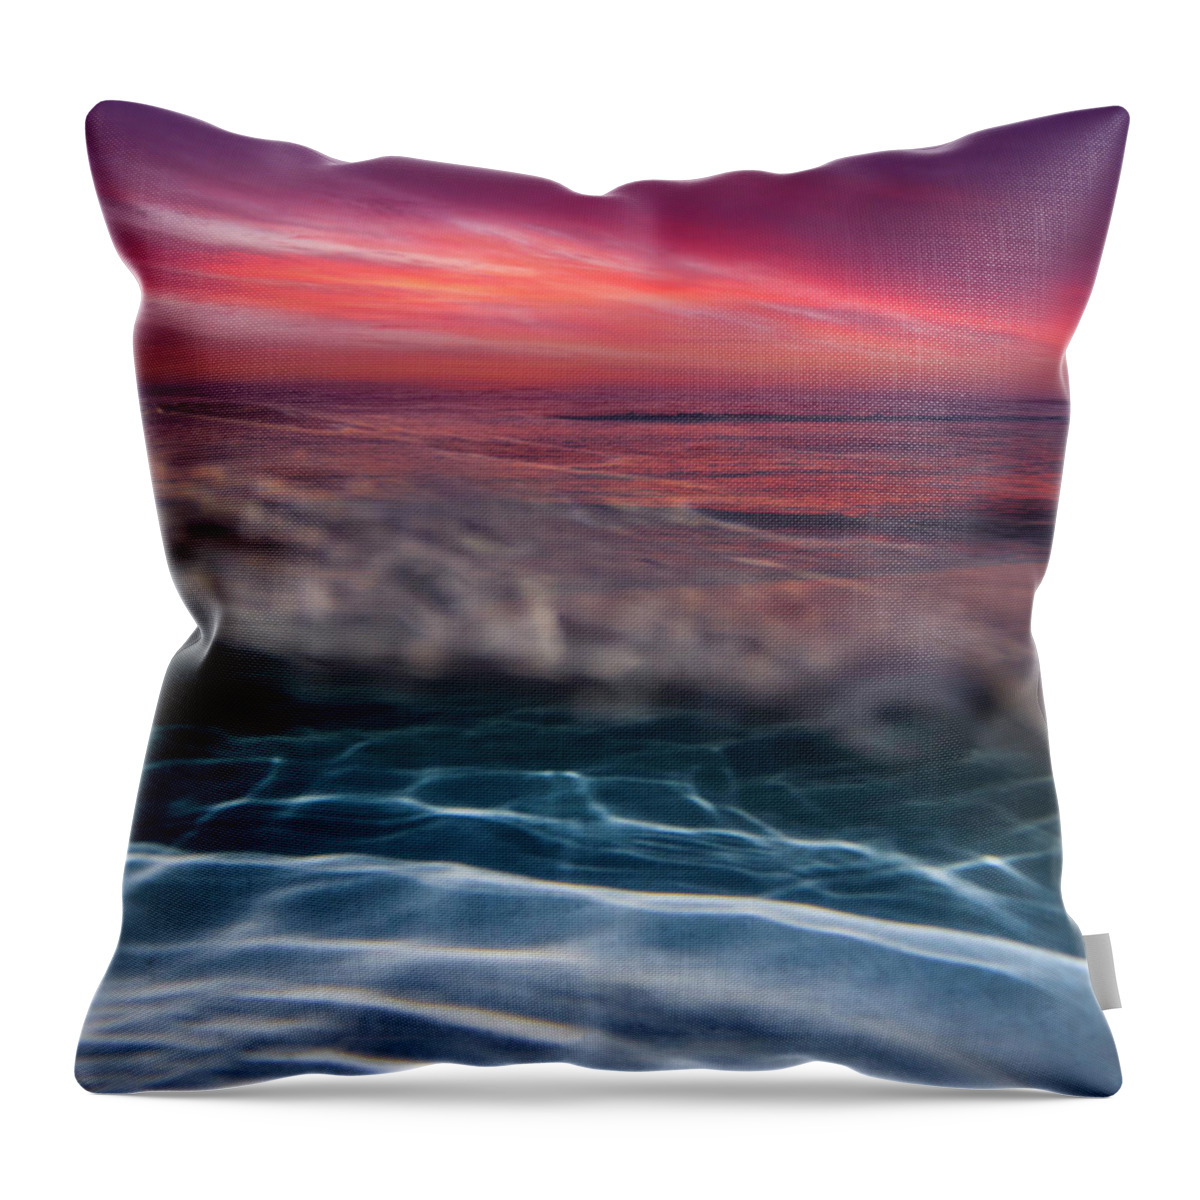 Water Throw Pillow featuring the photograph Morning Hues by Micah Roemmling